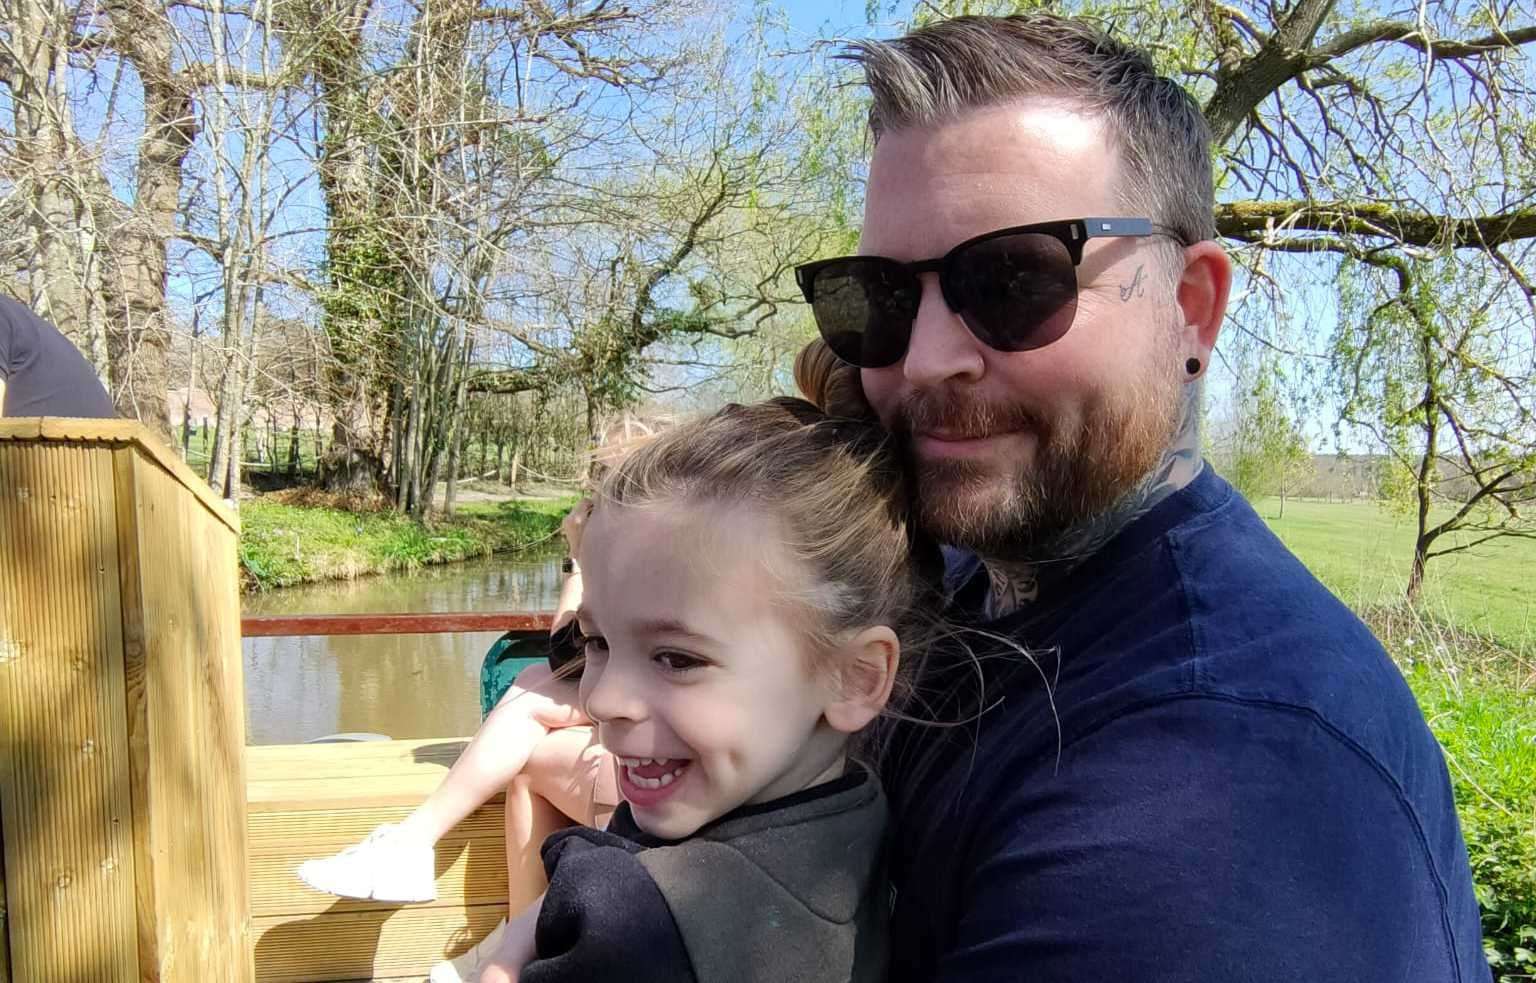 Leon Zanre, pictured with son Abel, has been told by medics that it could be years until he can walk properly again following the crash. Picture: Leon Zanre